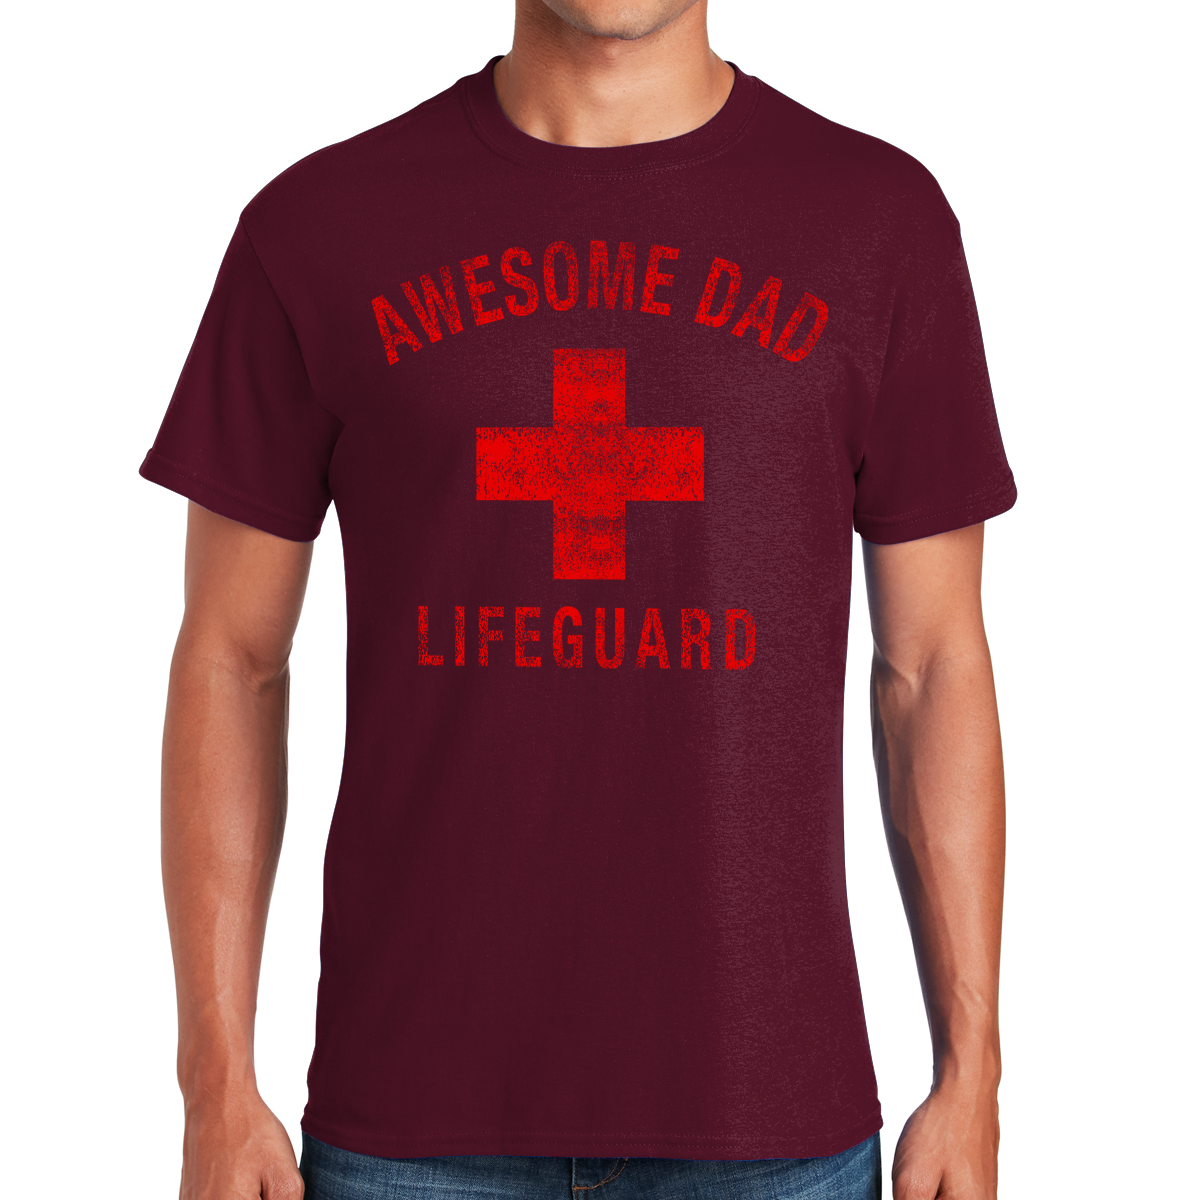 Awesome Dad Lifeguard Saving Lives On And Off Duty Gift For Dads T-shirt